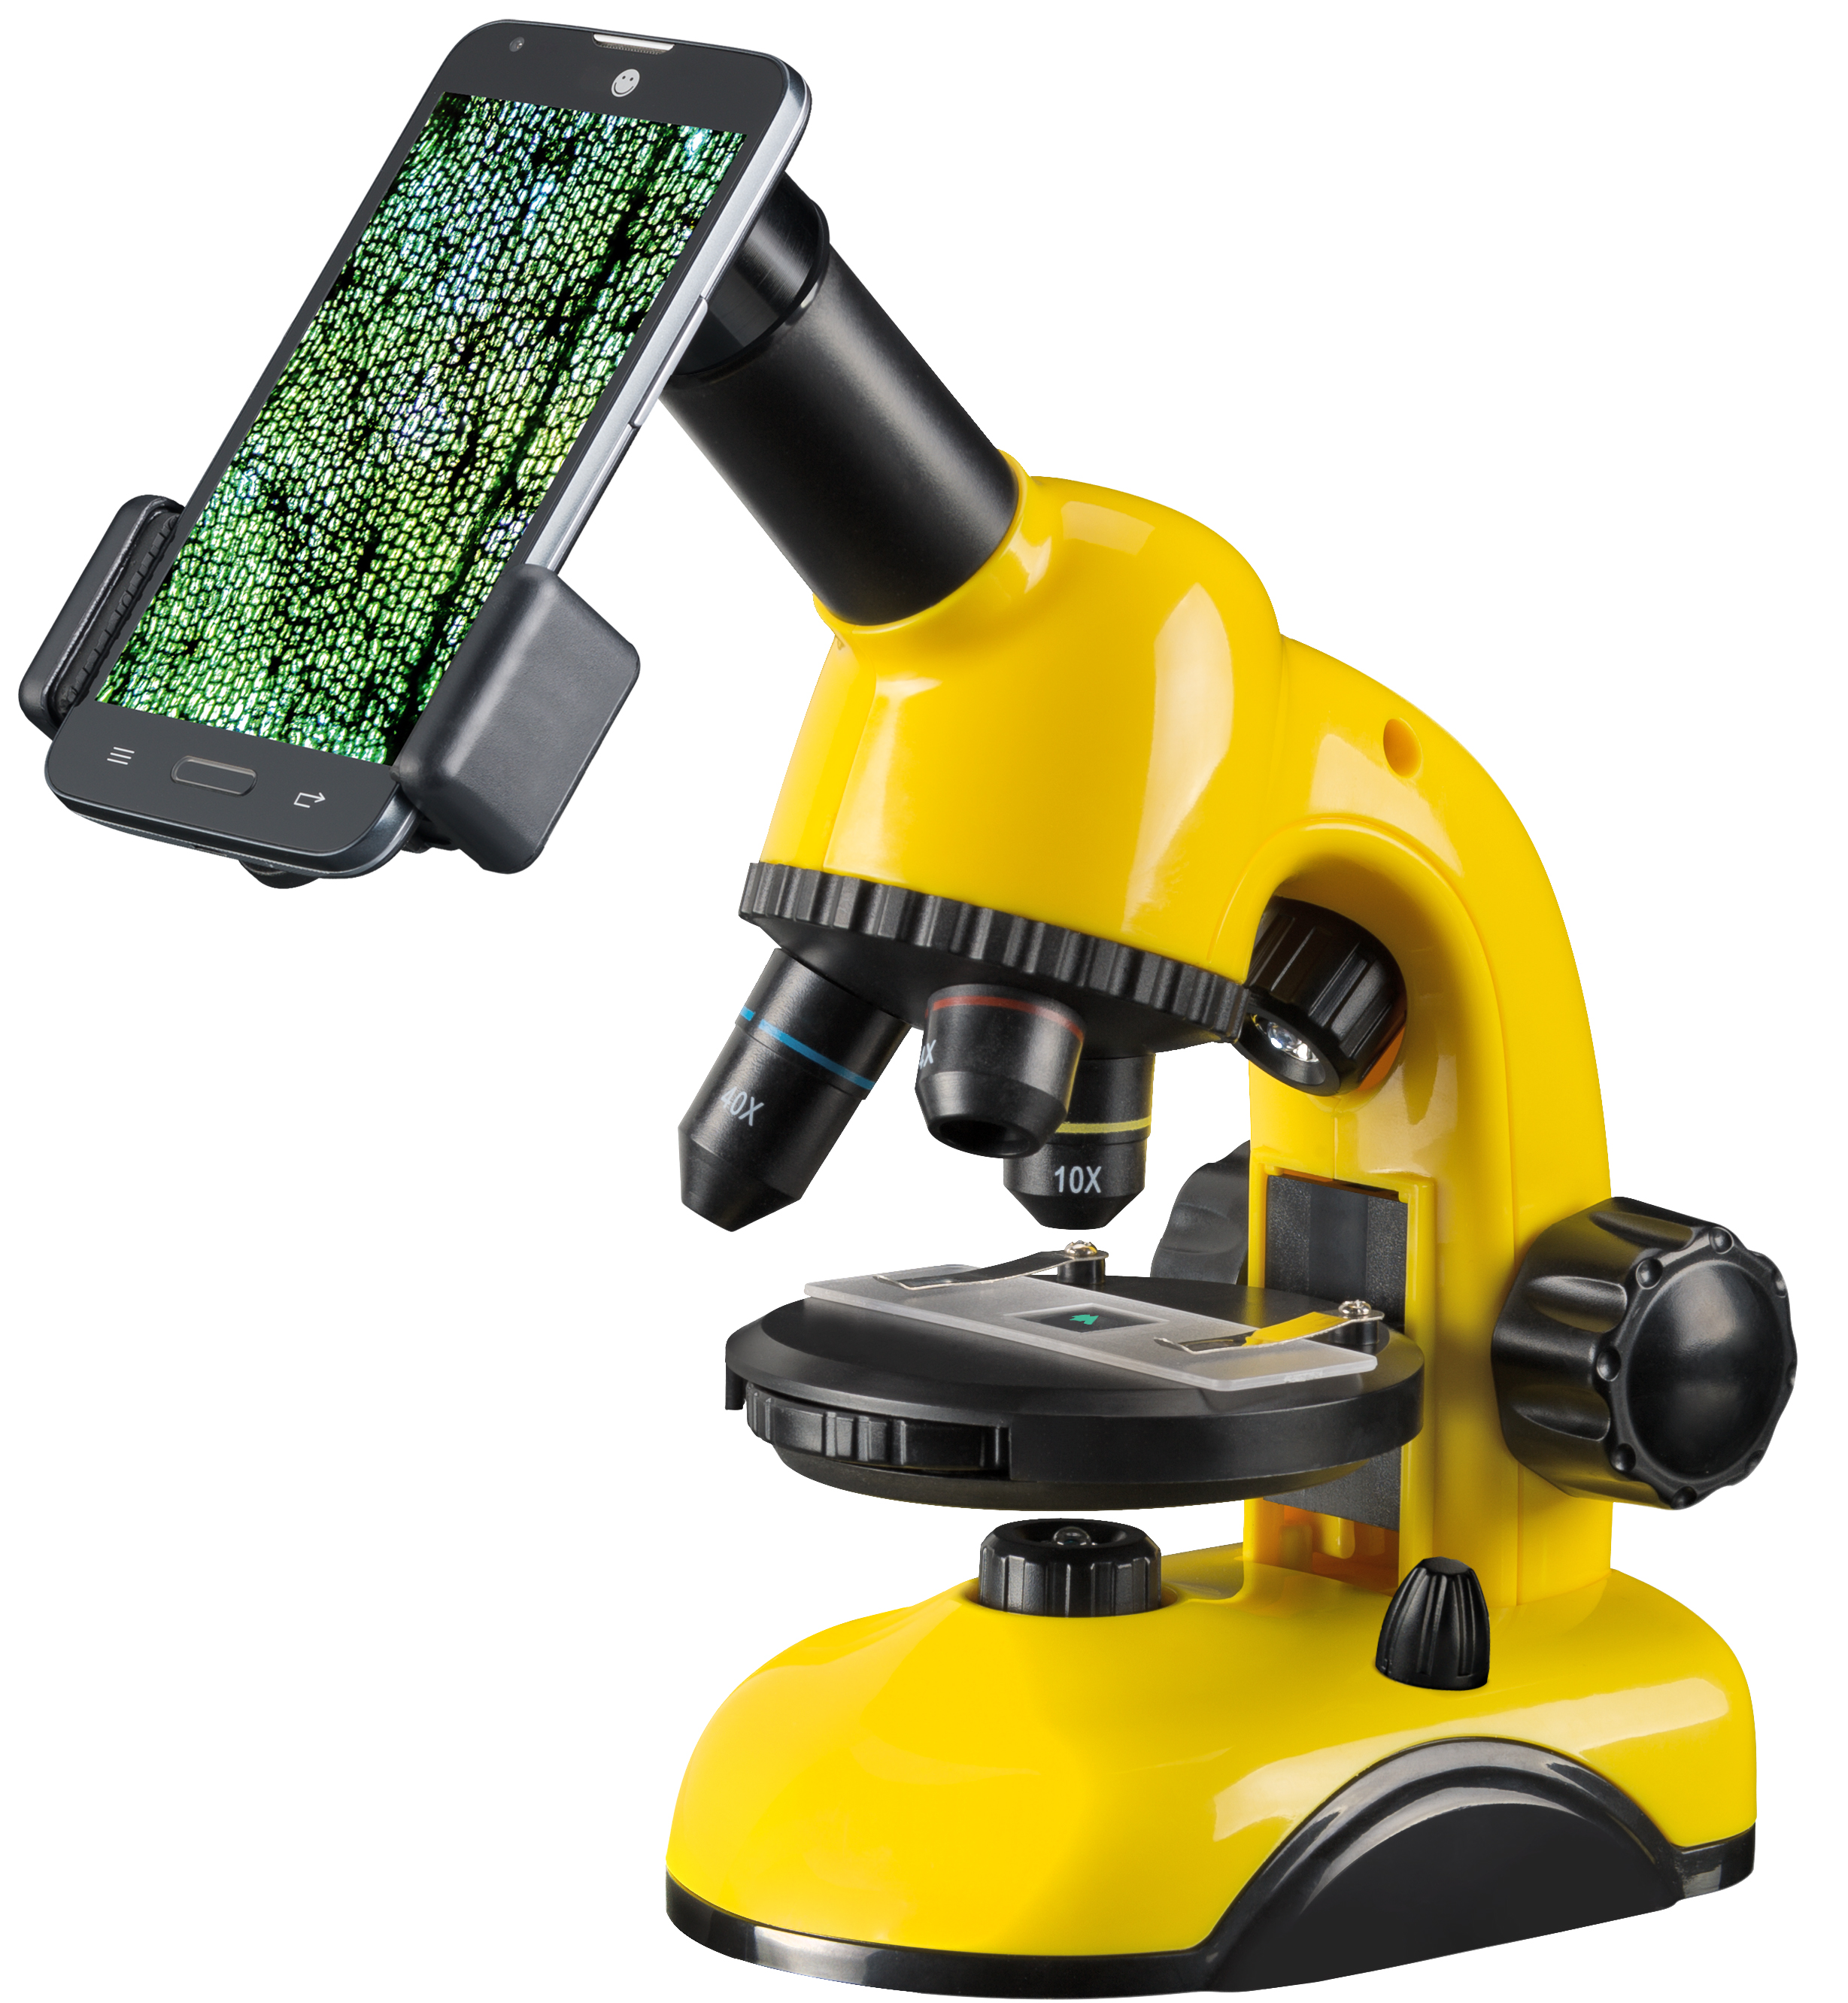 NATIONAL GEOGRAPHIC Biolux Student Microscope-Set